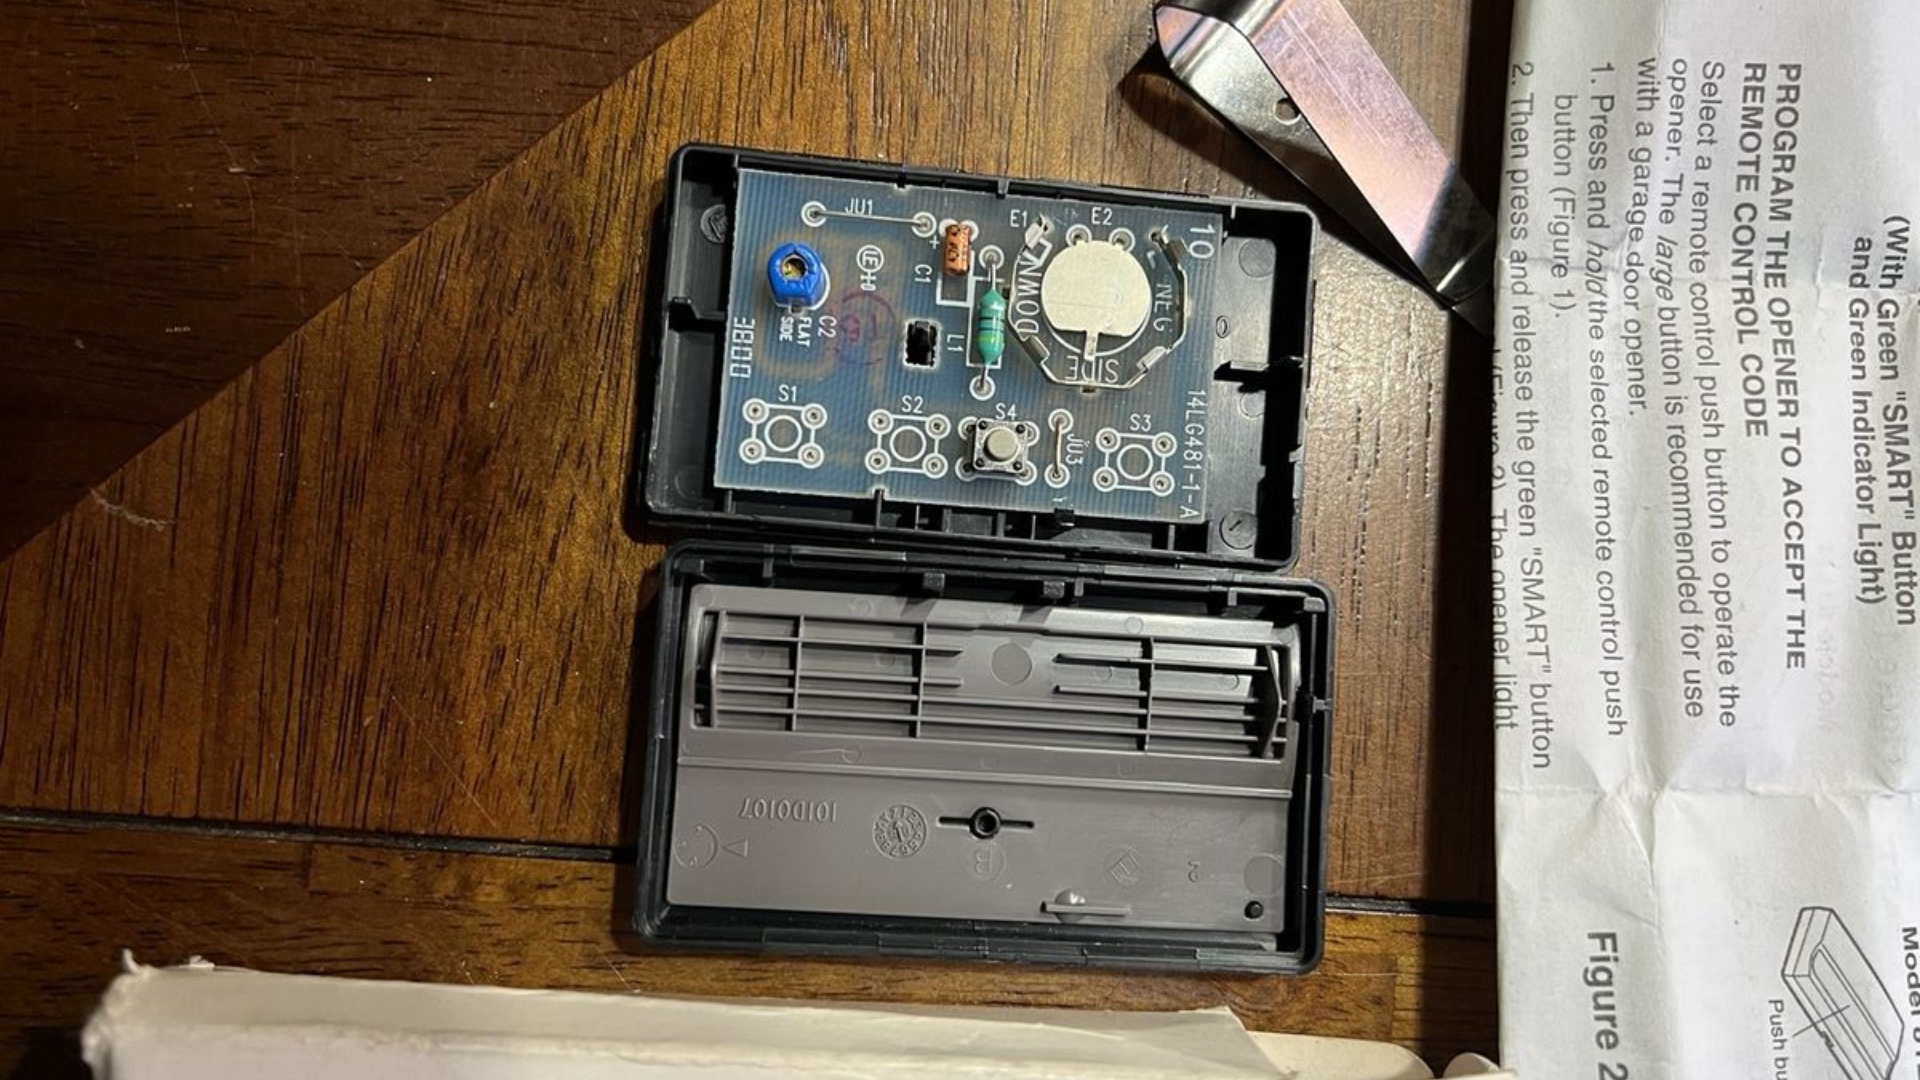 A garage door remote opened to check the wirings and battery